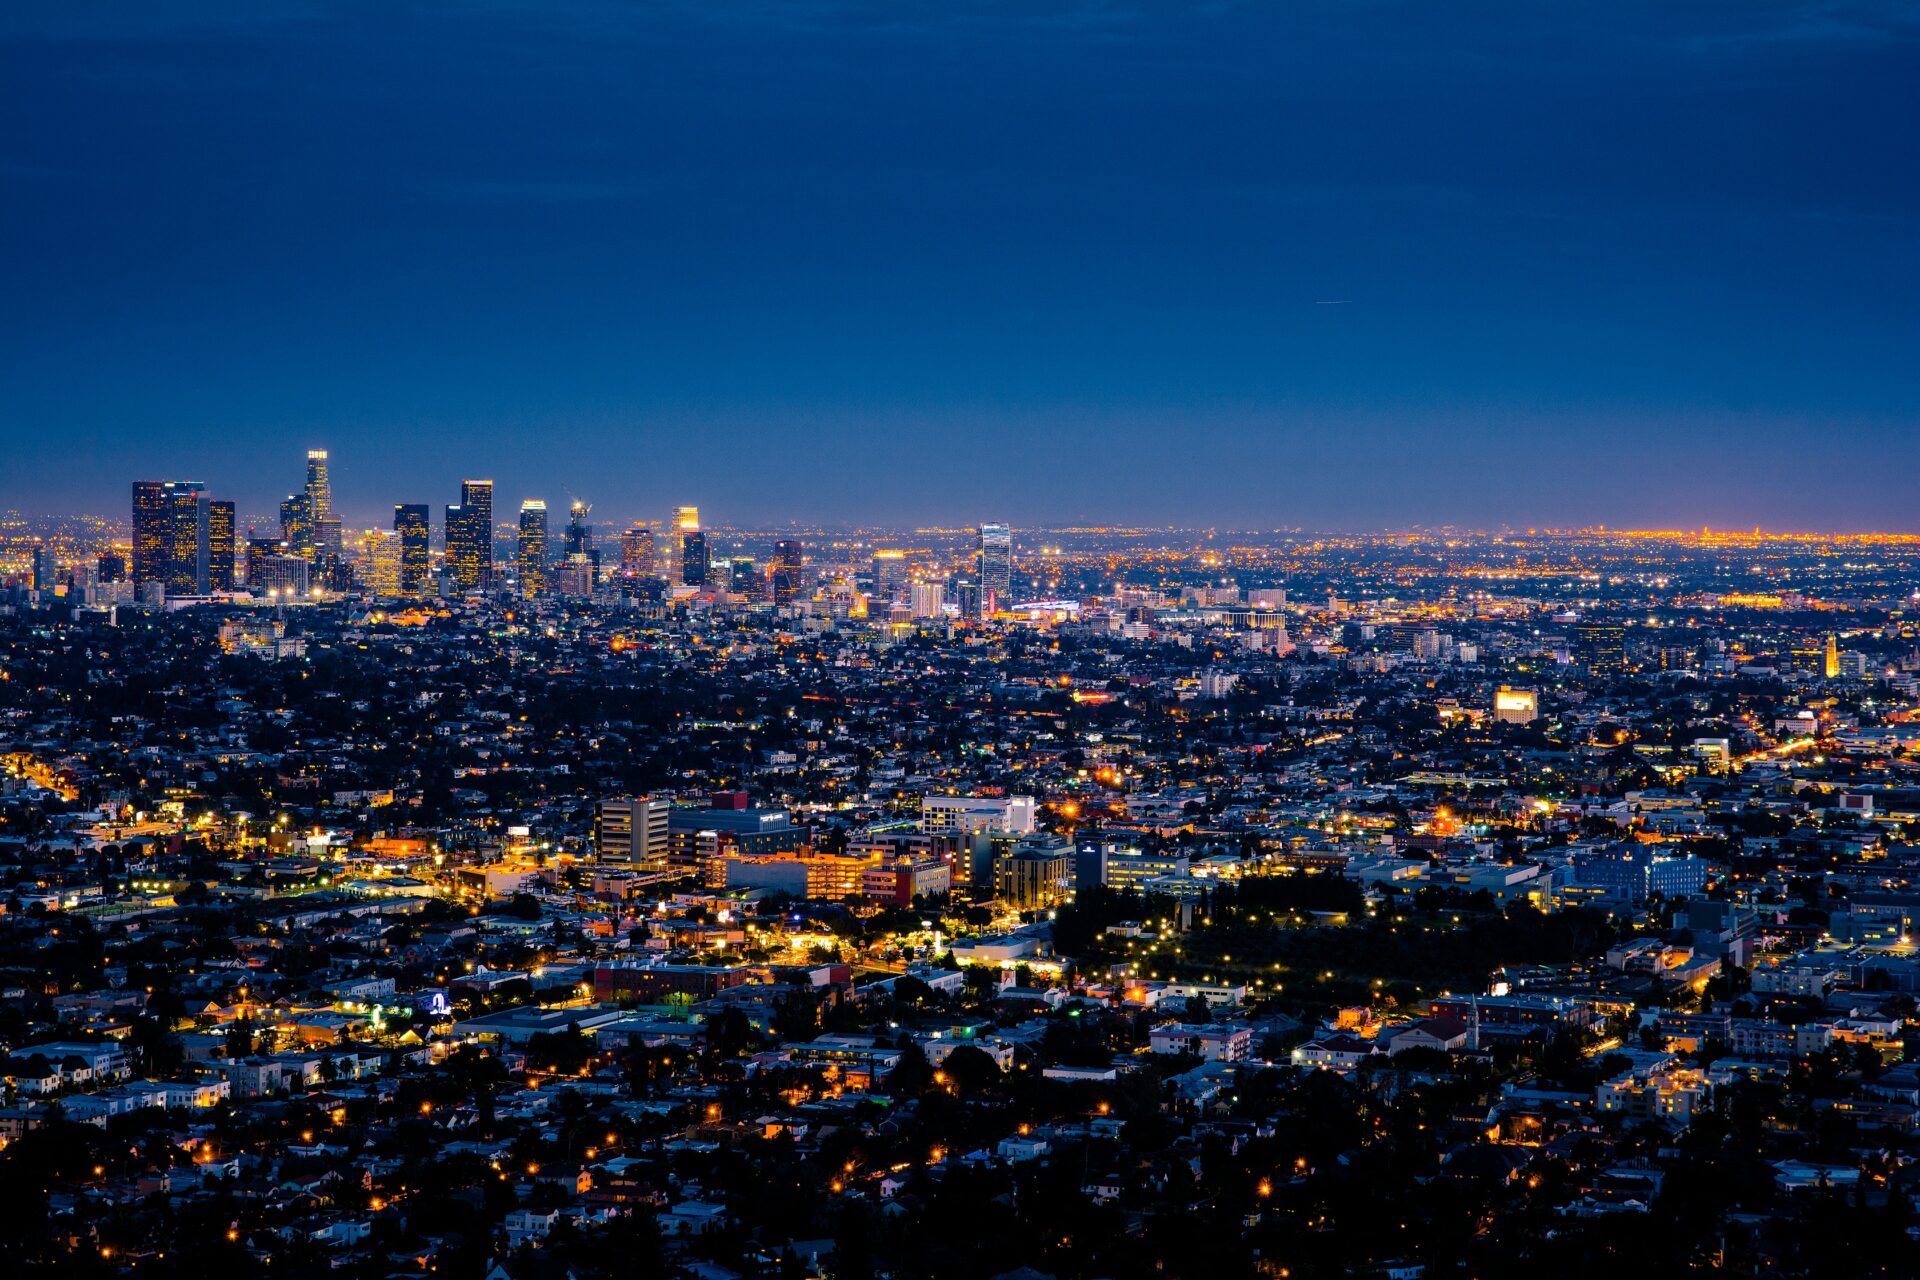 A view of the city of los angeles at night.